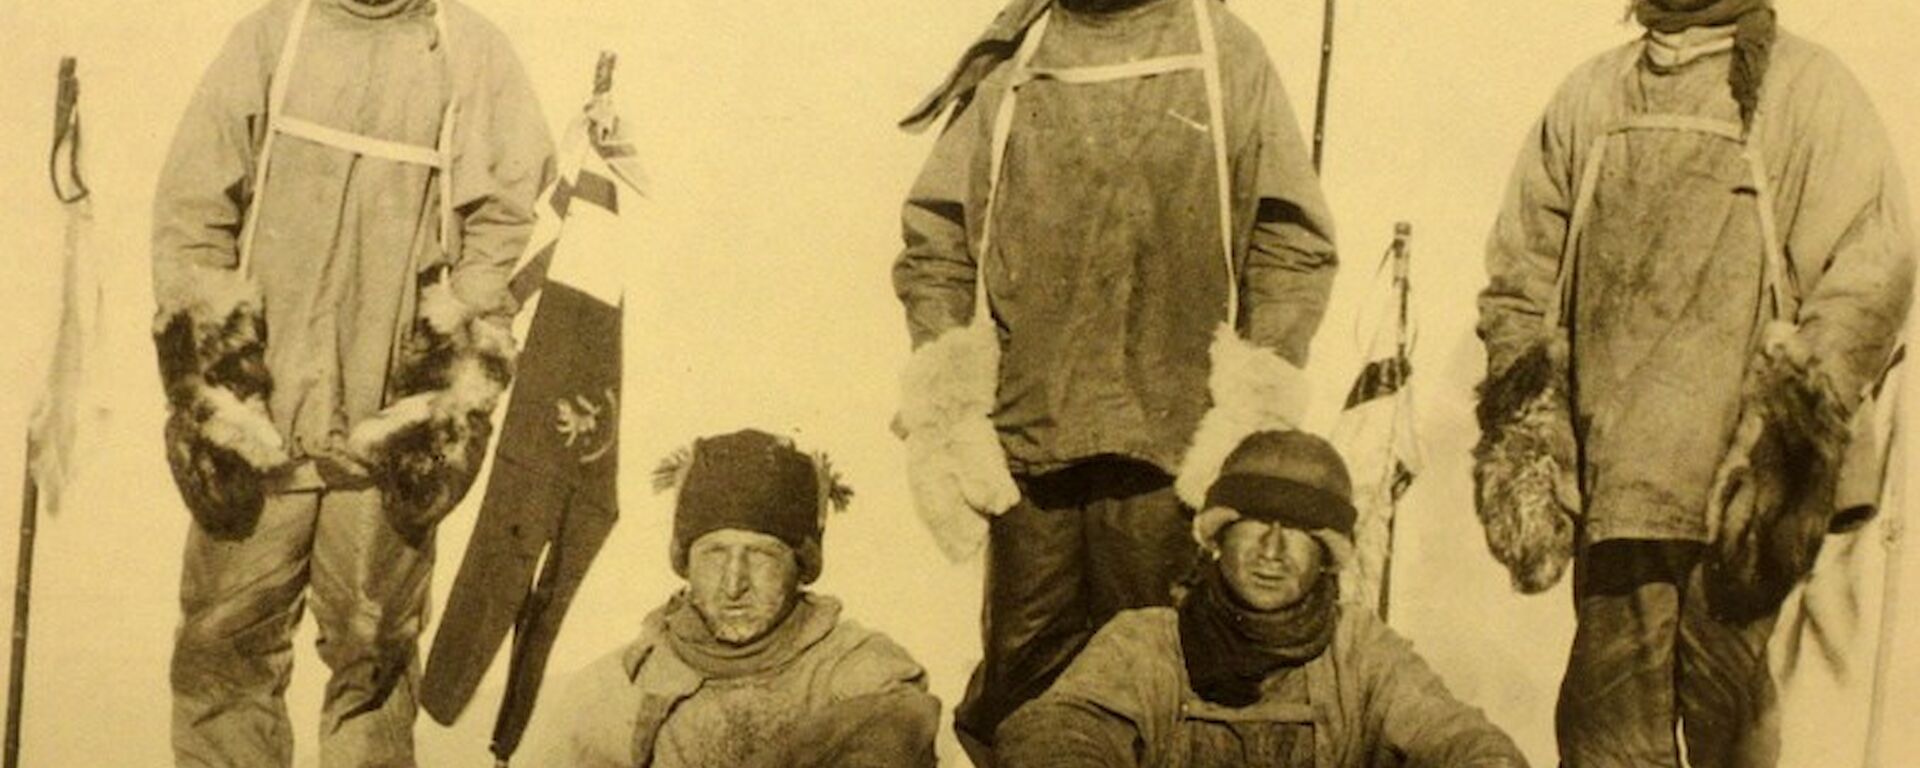 Scott and team at the South Pole.